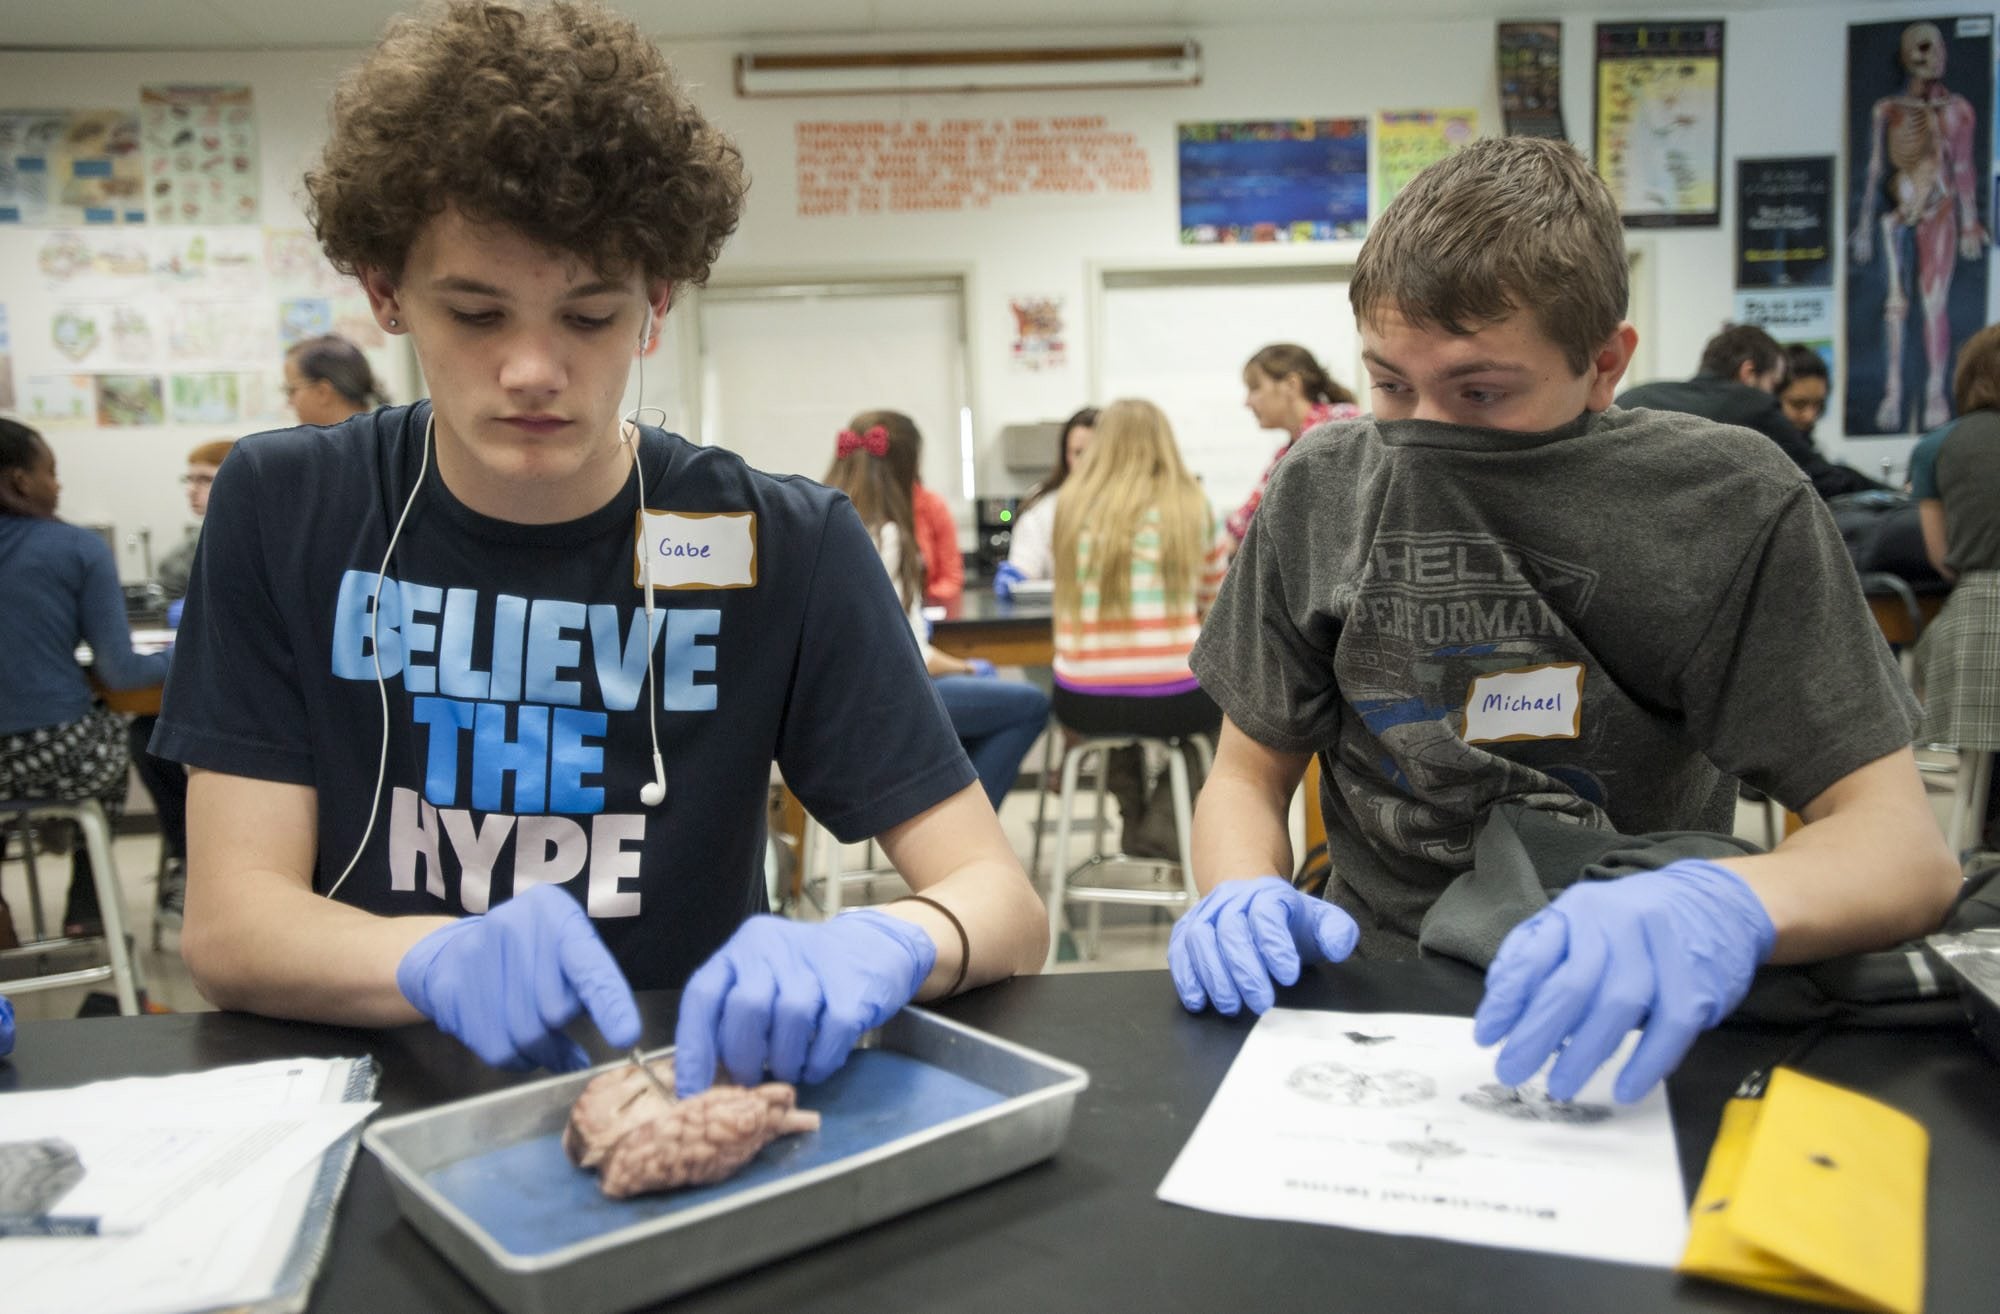 Biology students Gabe McMahon, left, and Michael Lovine dissect sheep brains at Skyview High School in 2015. NW Noggin, a nonprofit organization of volunteer neuroscientists, brought the sheep brains to the class for dissection. Lovine covered his face with his t-shirt to mask the smell.